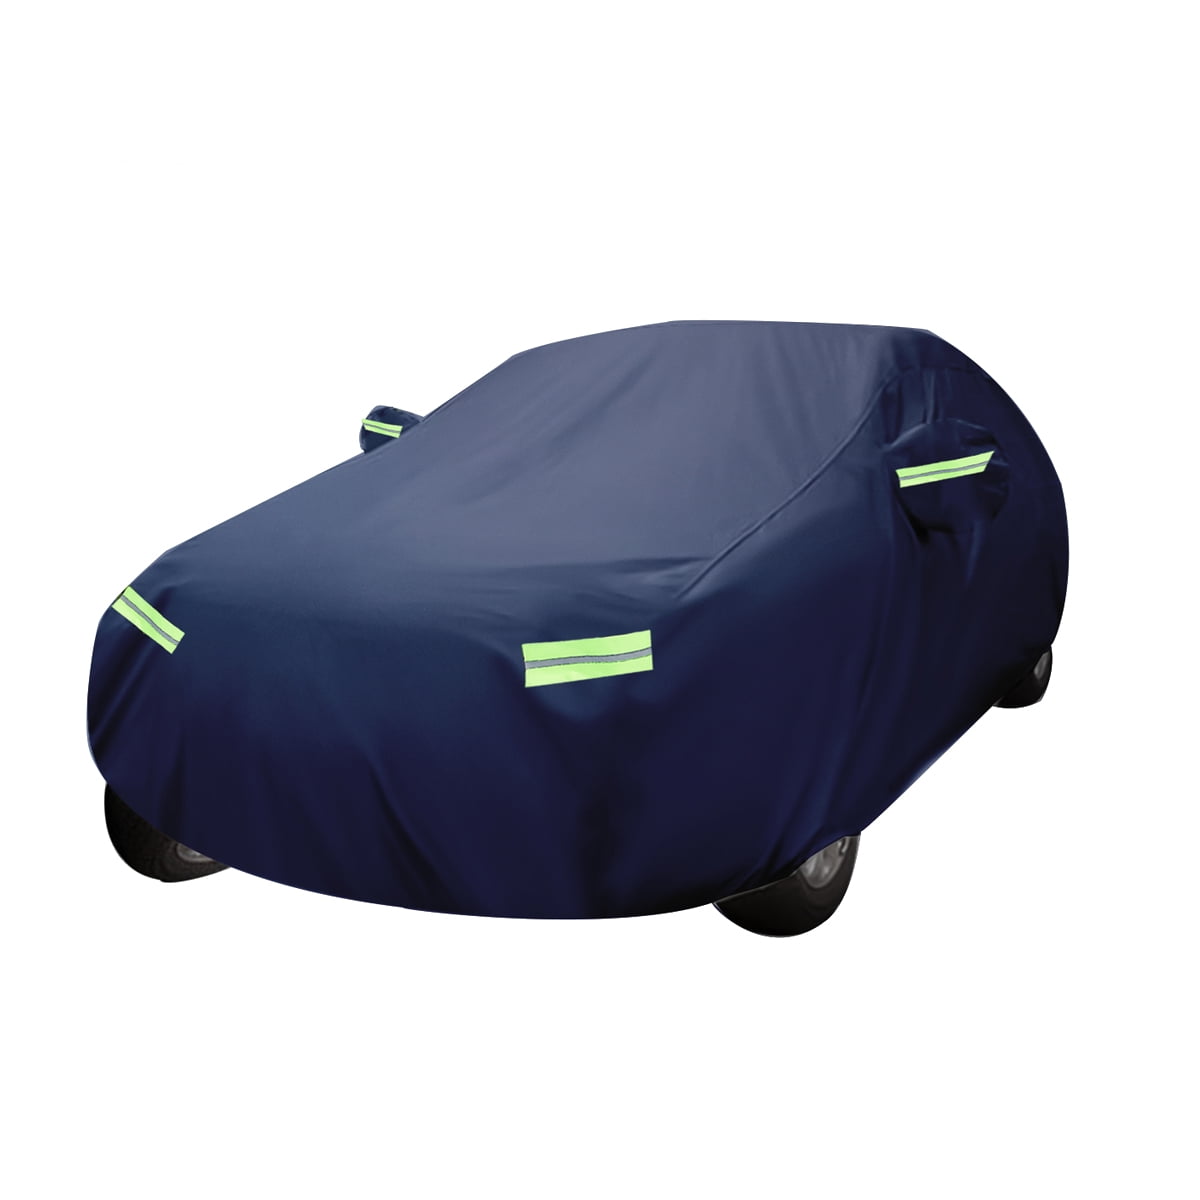 Universal Full Car Cover Waterproof Dust-proof UV Resistant Outdoor All  Weather Protection, L Size - 185L x 68.9W x 59.05H